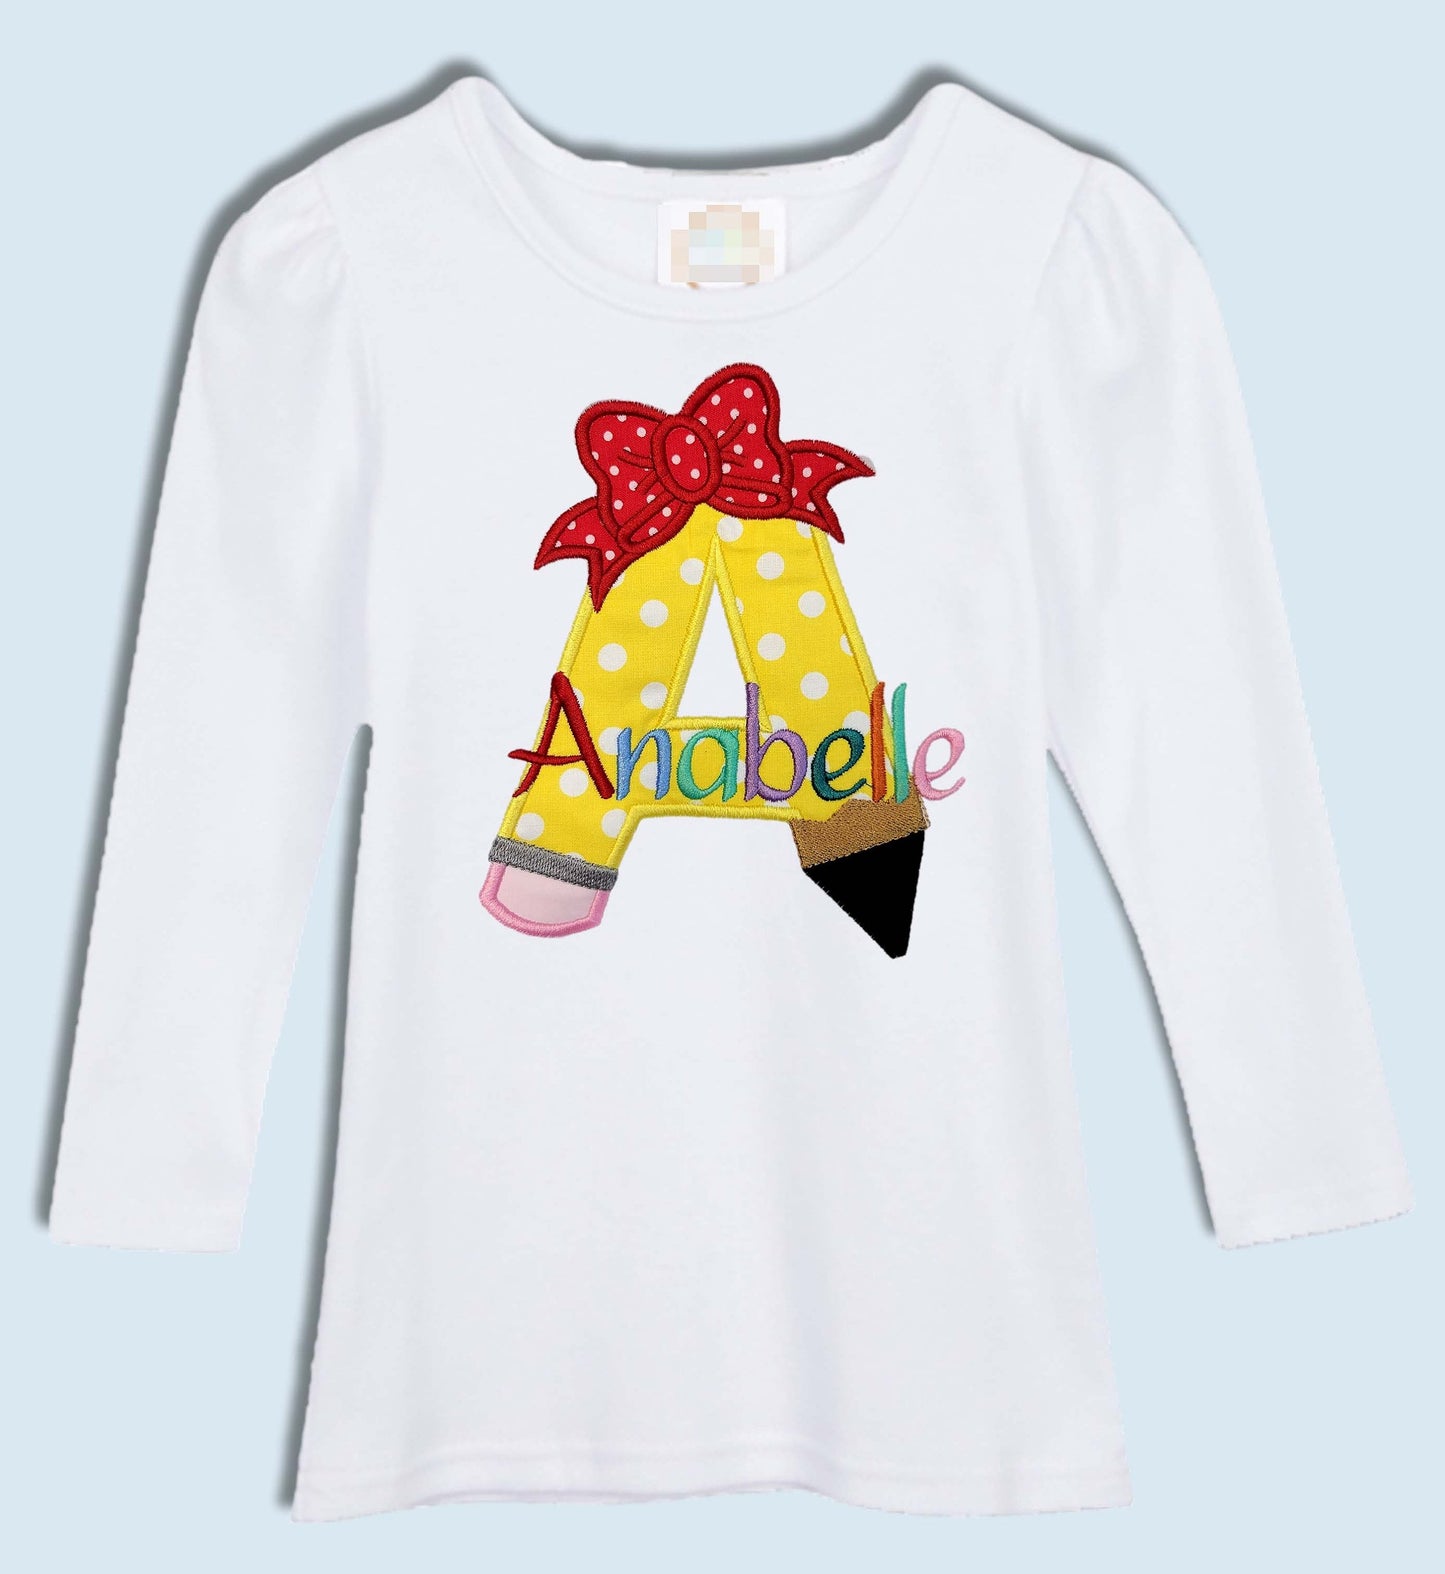 Back to School Shirt | Girls Personalized School Shirt | First Day of Class embroidered T-Shirt